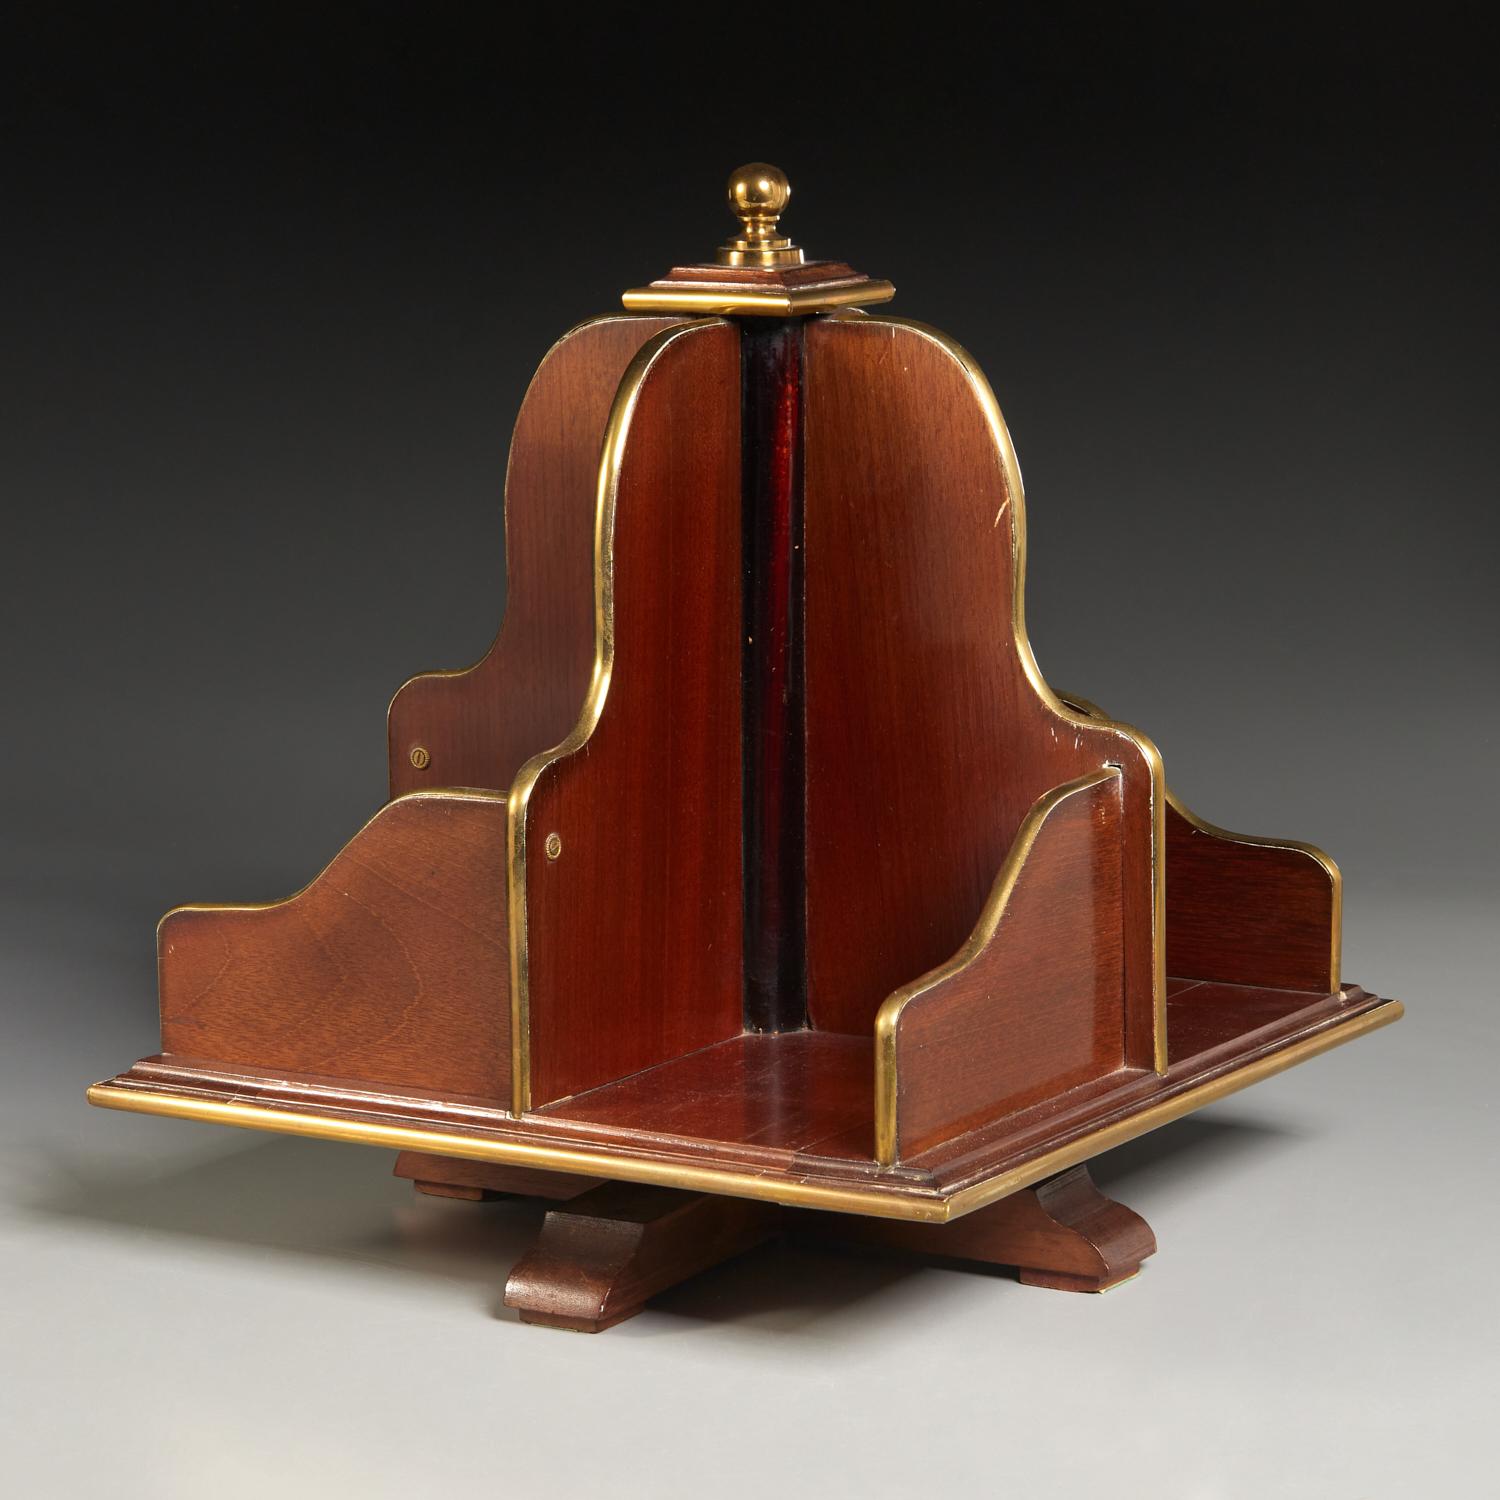 19th c., England, mahogany brass mounted rotating stand divided into four compartments, topped with a brass finial. A handsome addition to any desk, providing an interesting talking point and a fine way to store your upcoming reads. An opportunity